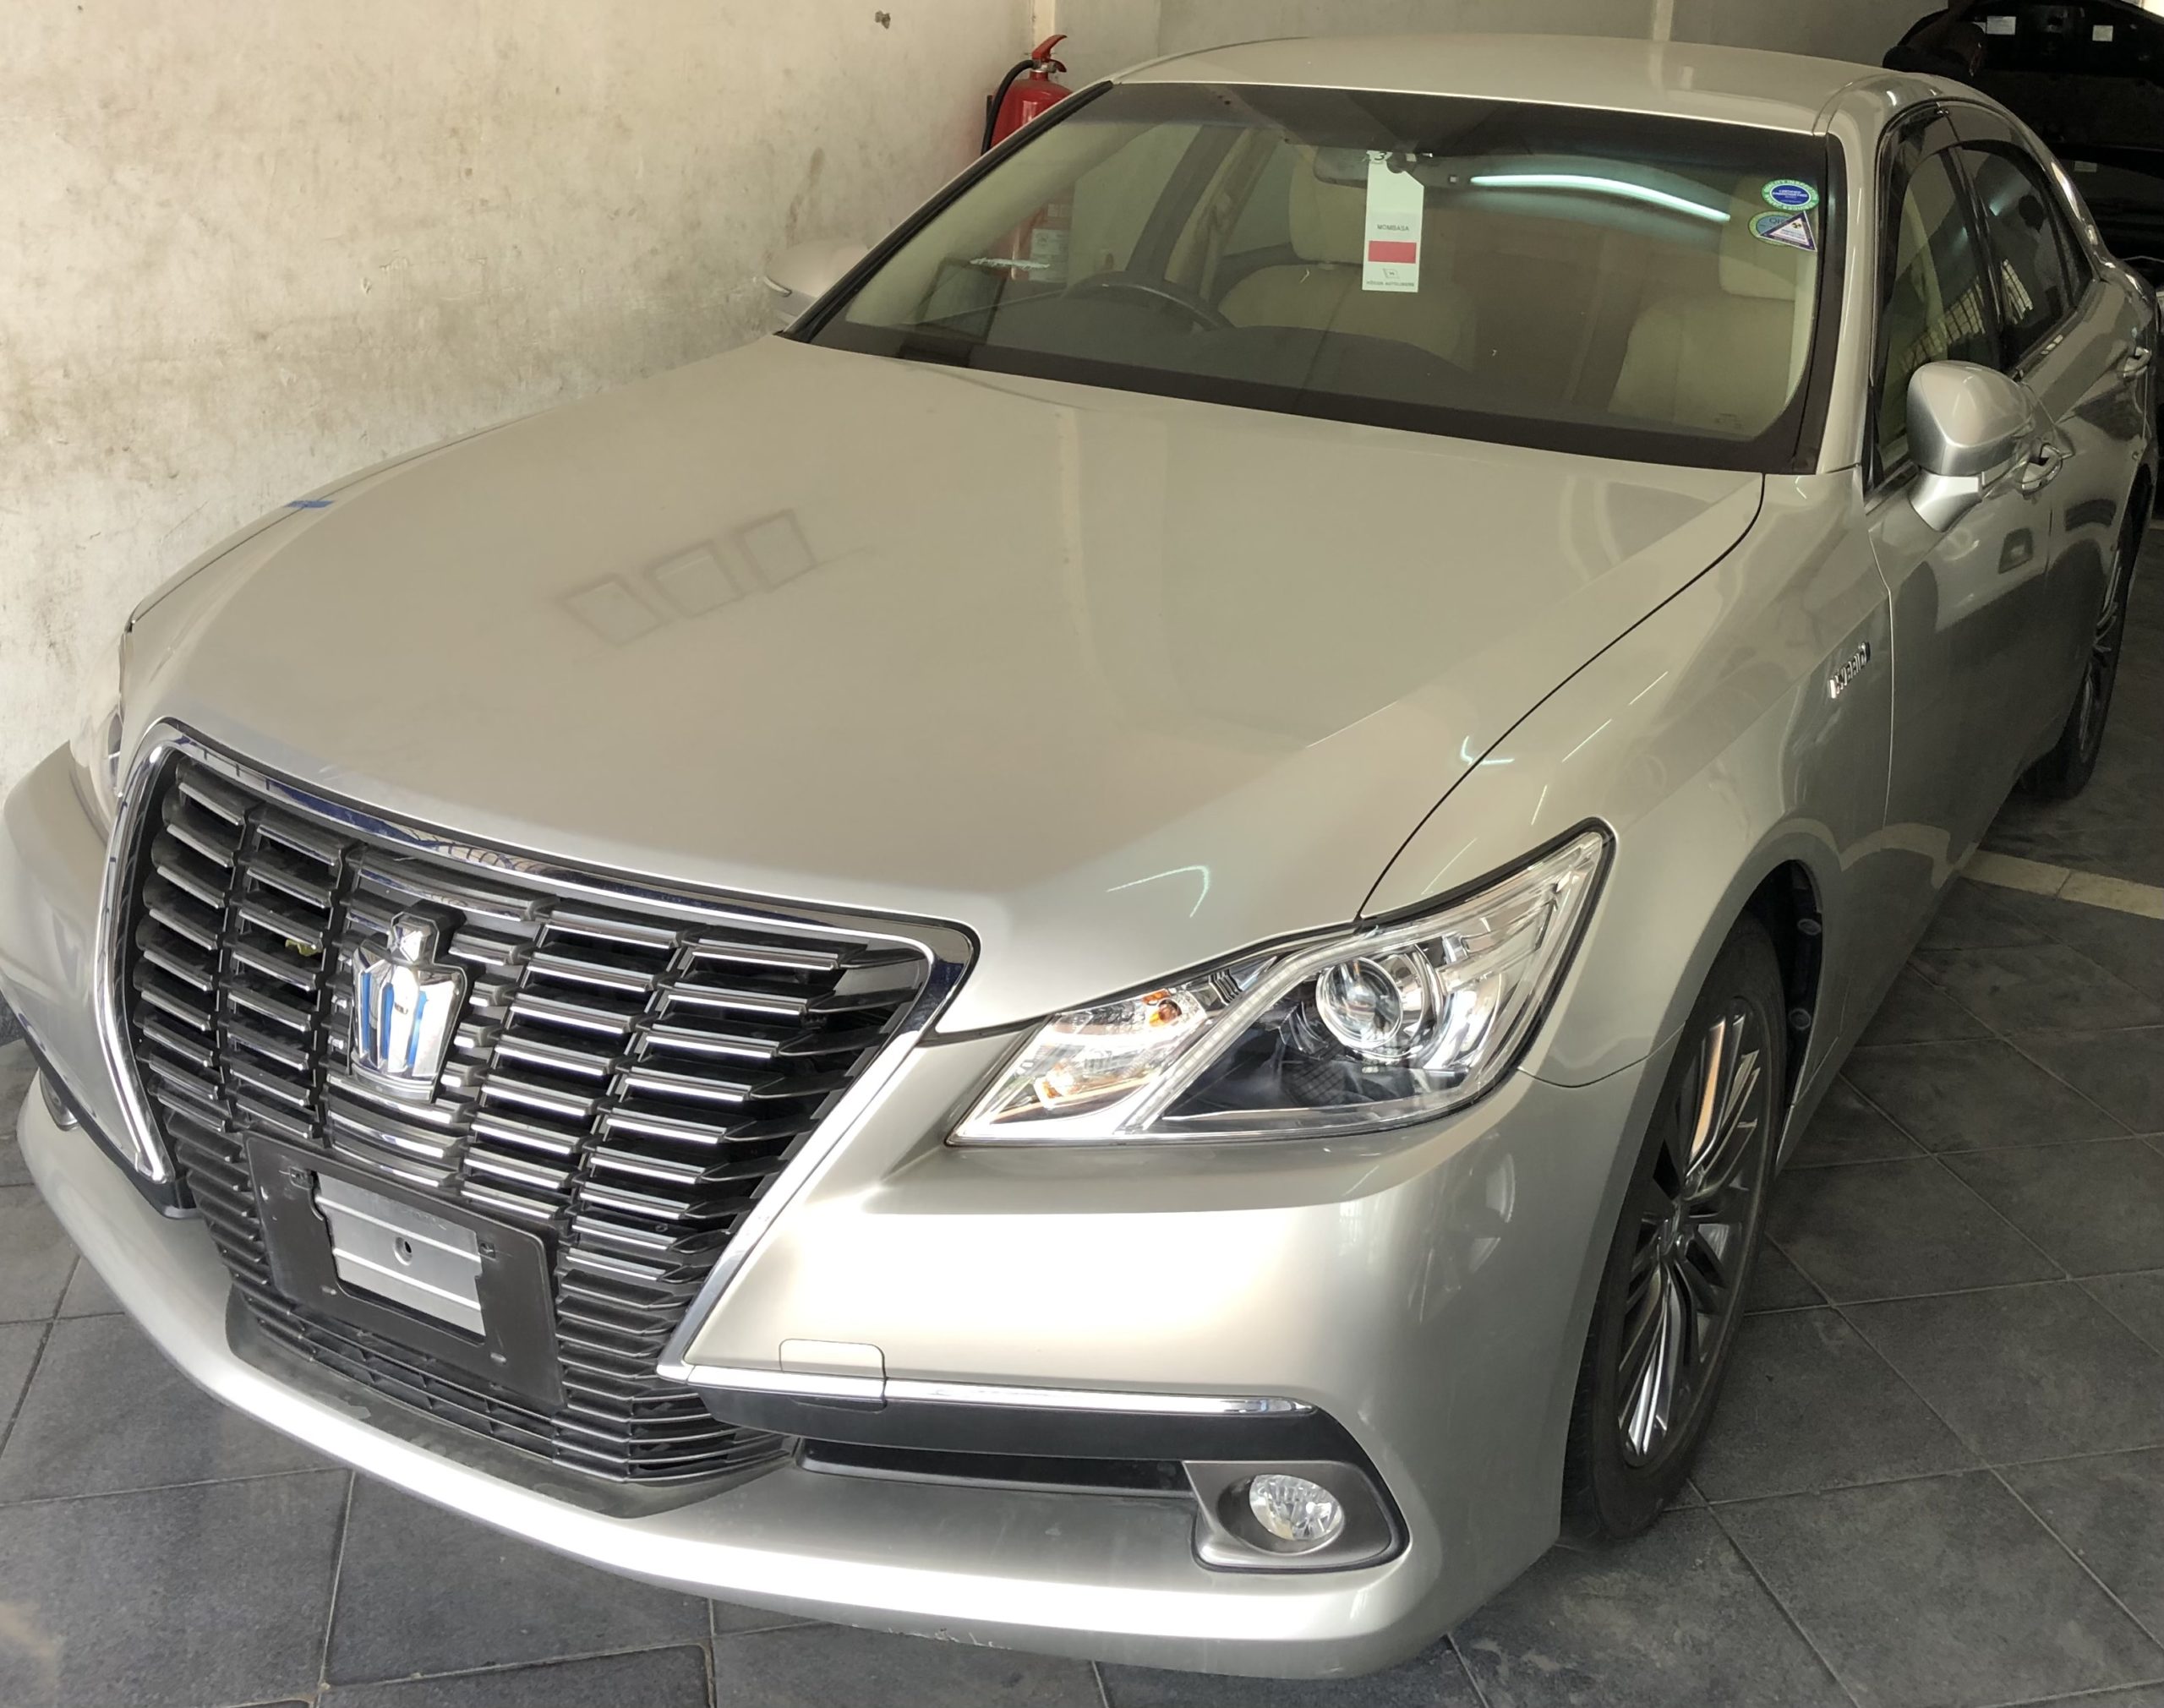 Toyota crown royalsaloon - Cars for sale in Kenya - Used and New